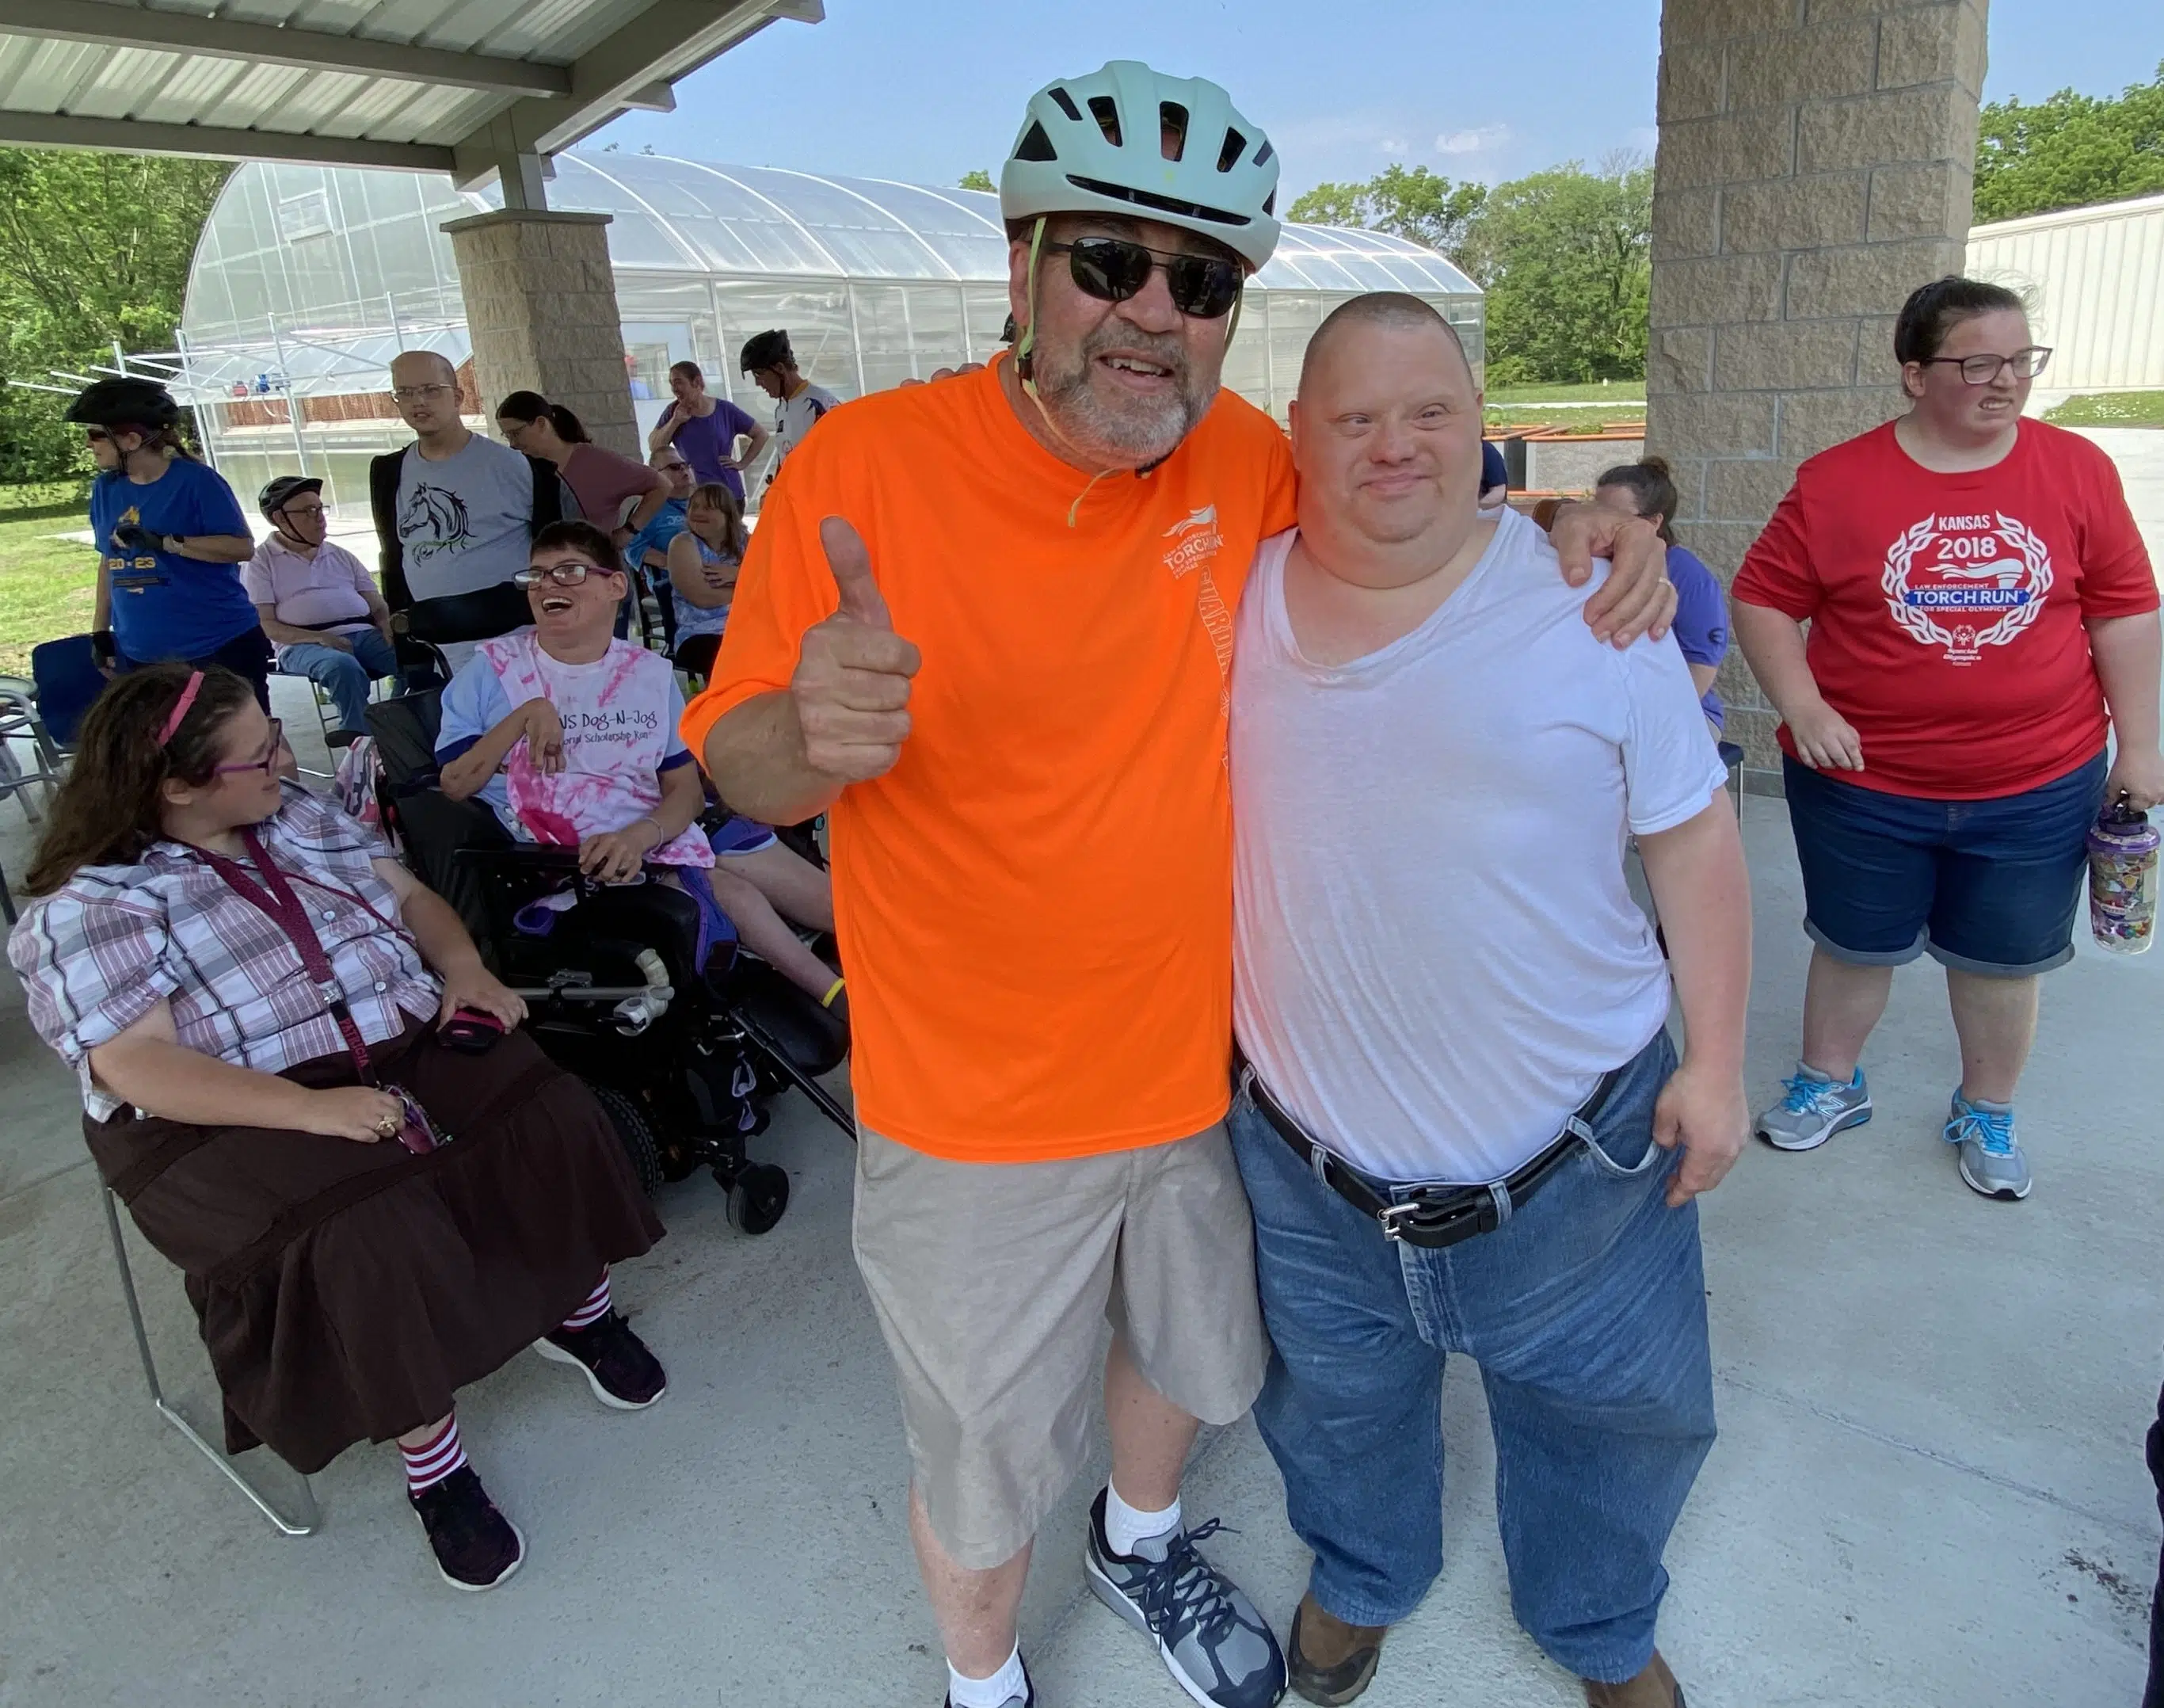 Ron's Ride passes $5,000 fundraising mark for Special Olympics